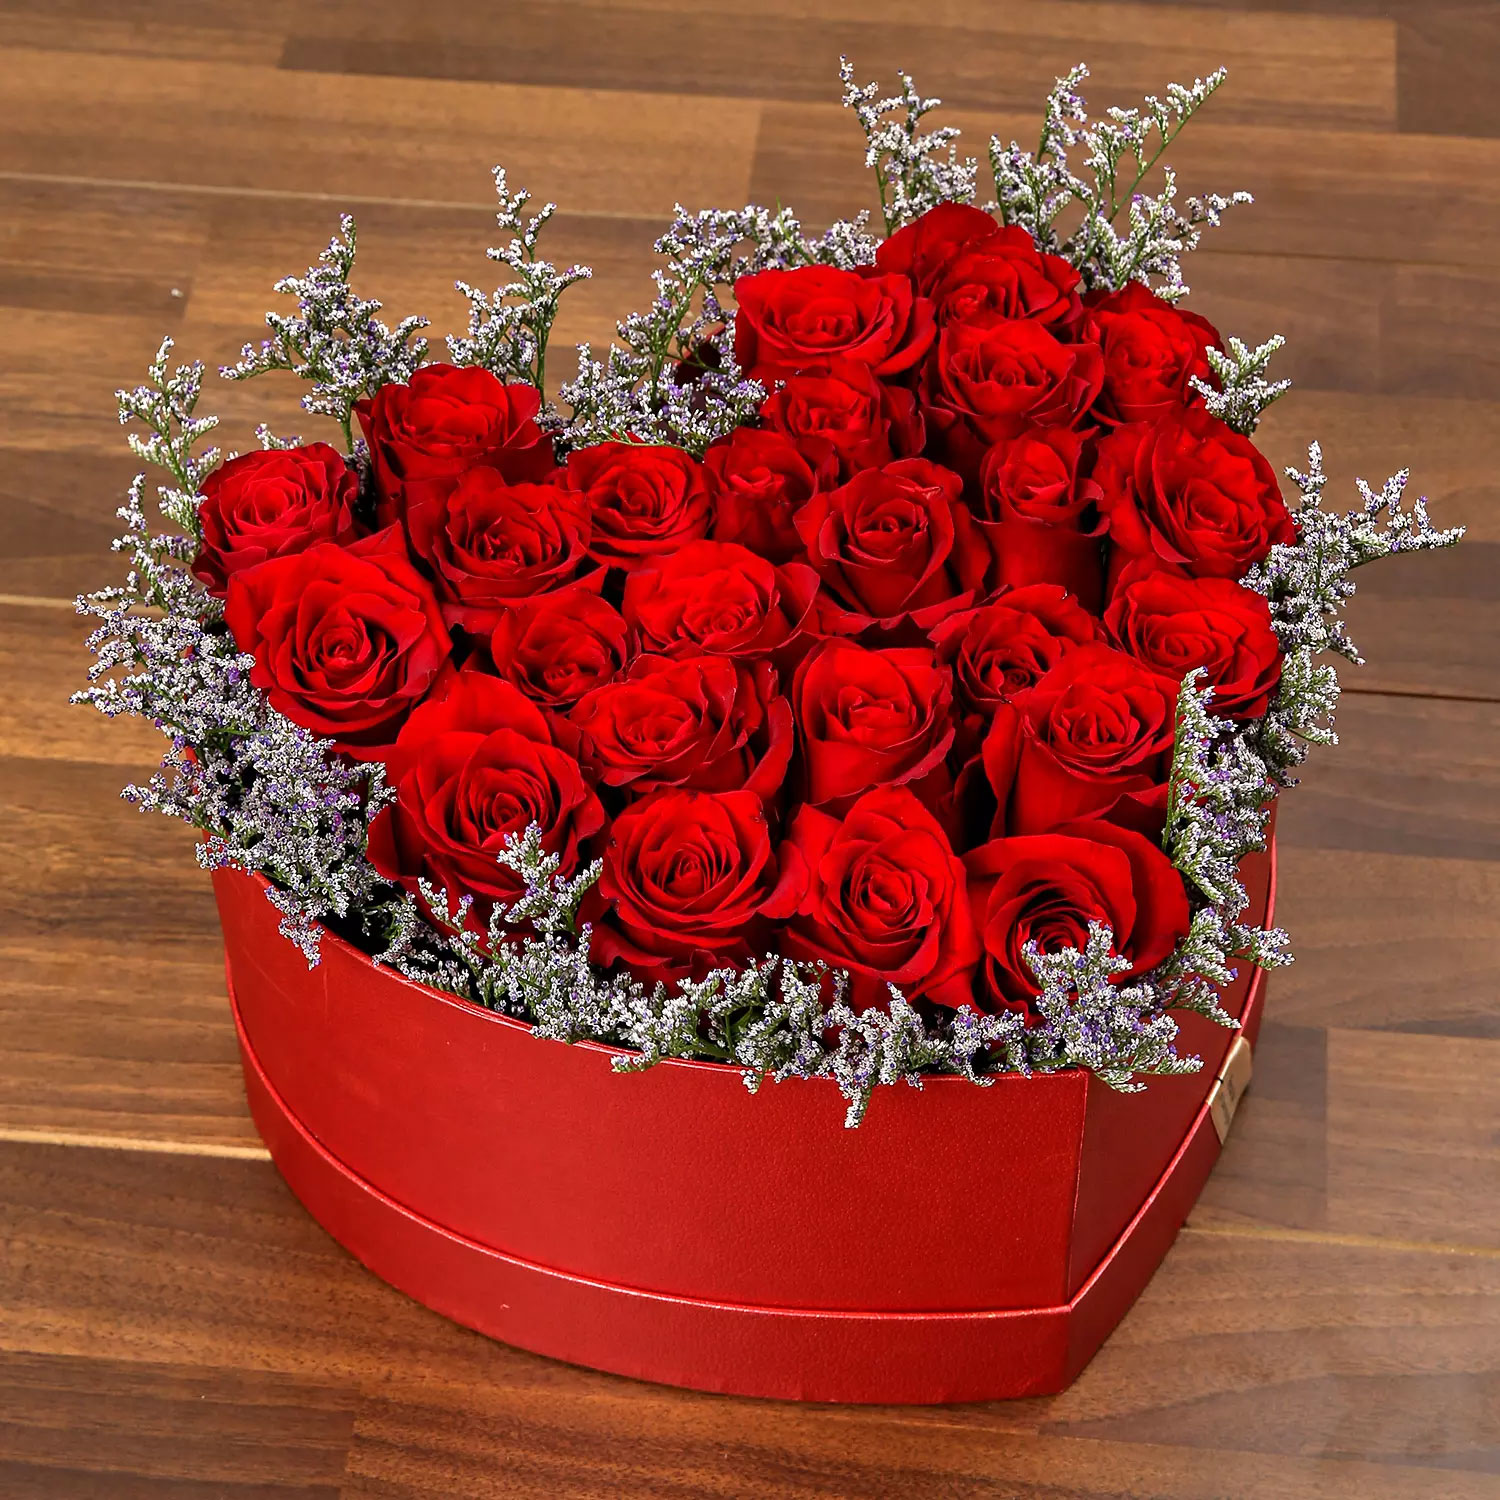 Online 25 Red Roses Heart Shaped Box Gift Delivery in Singapore - Ferns ...